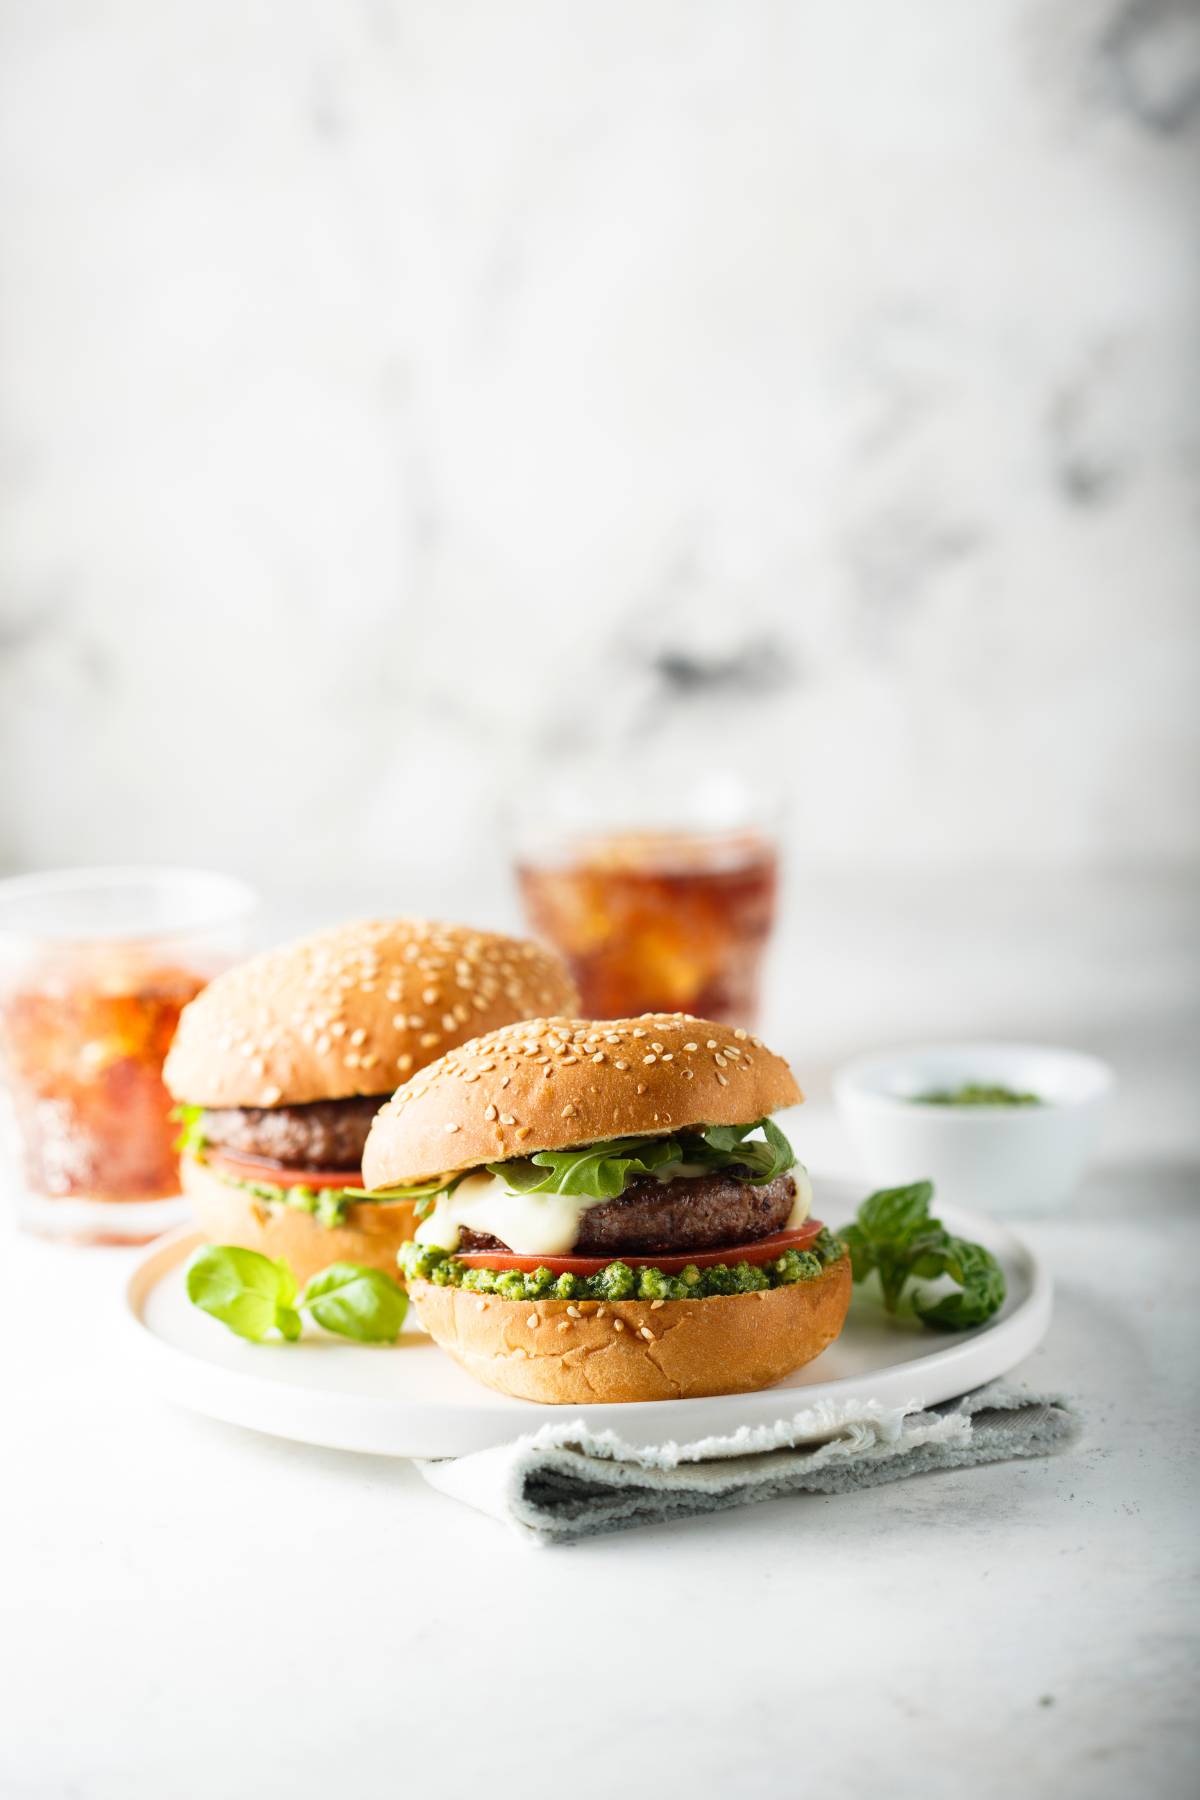 Easy Burger Dinner Ideas for Your Next Get-Together: Top 15